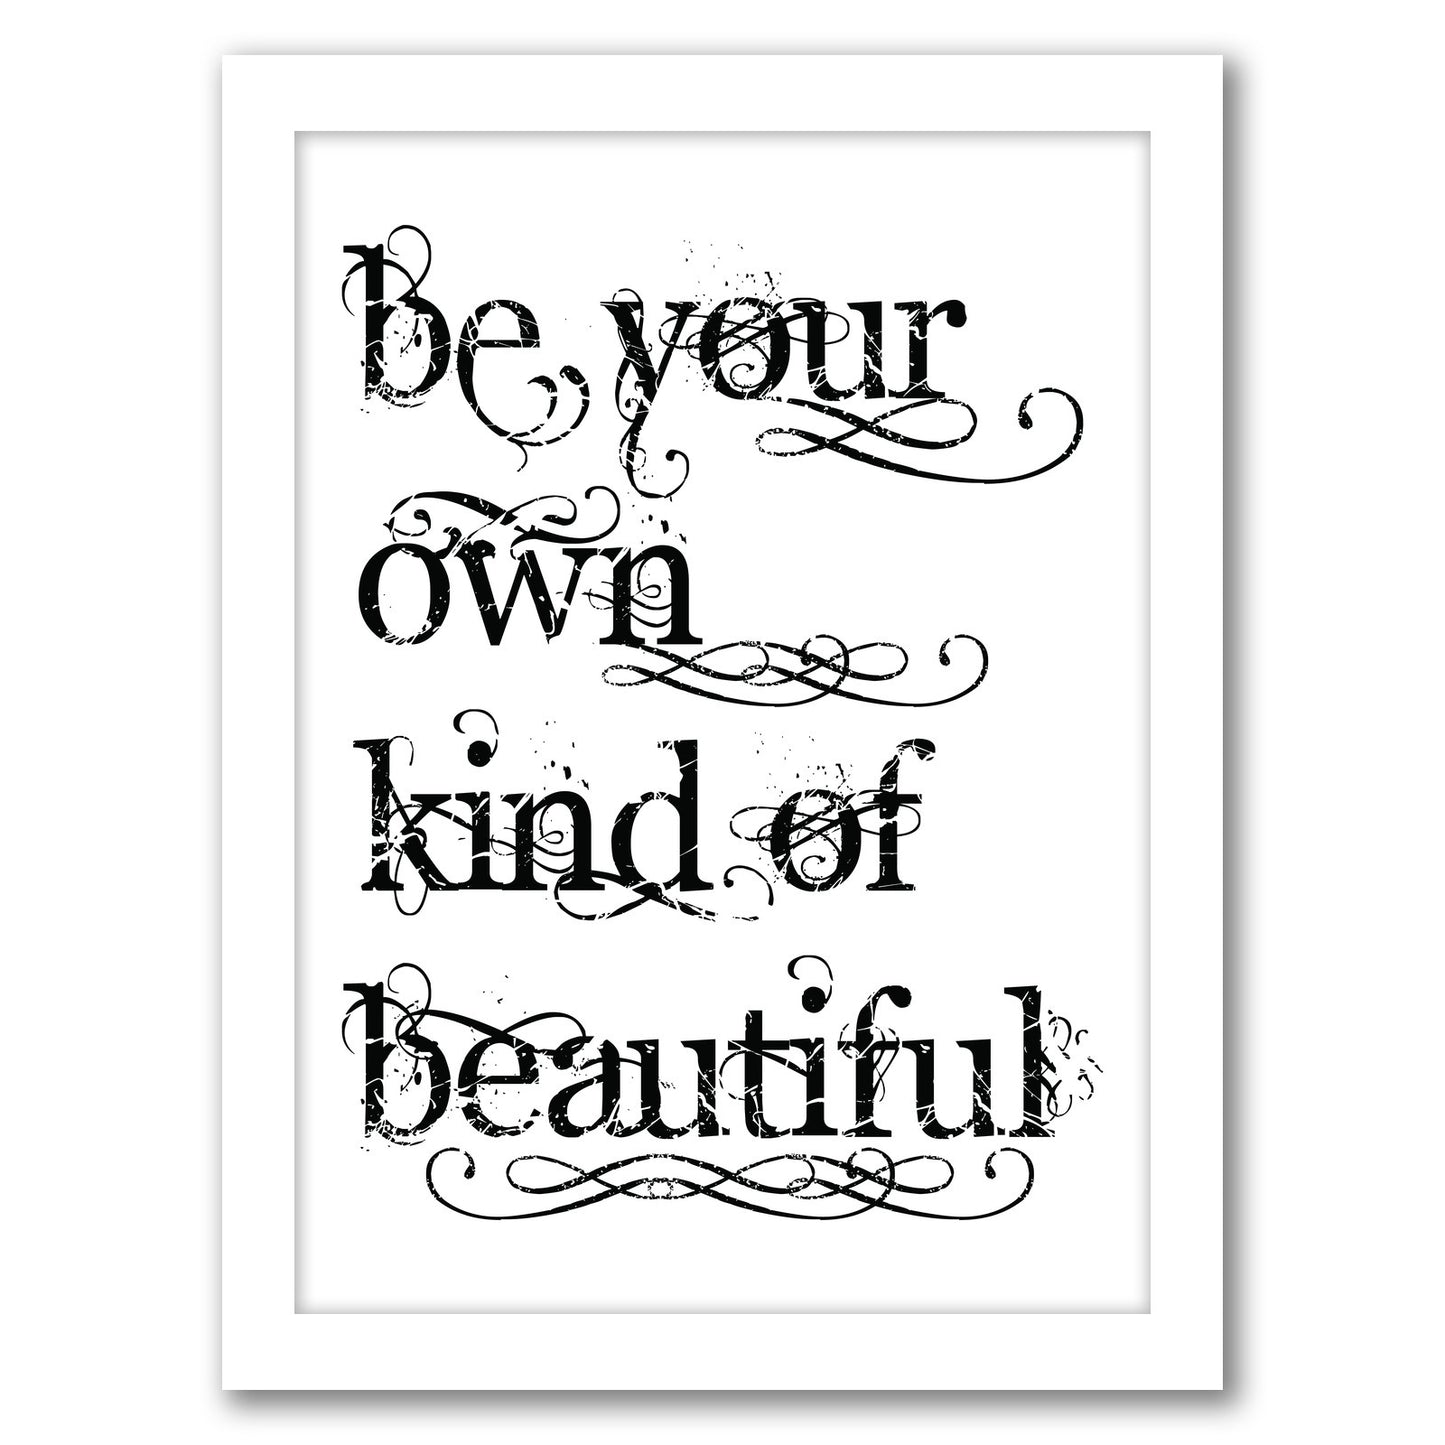 Be Own Beautiful by Amy Brinkman - Framed Print